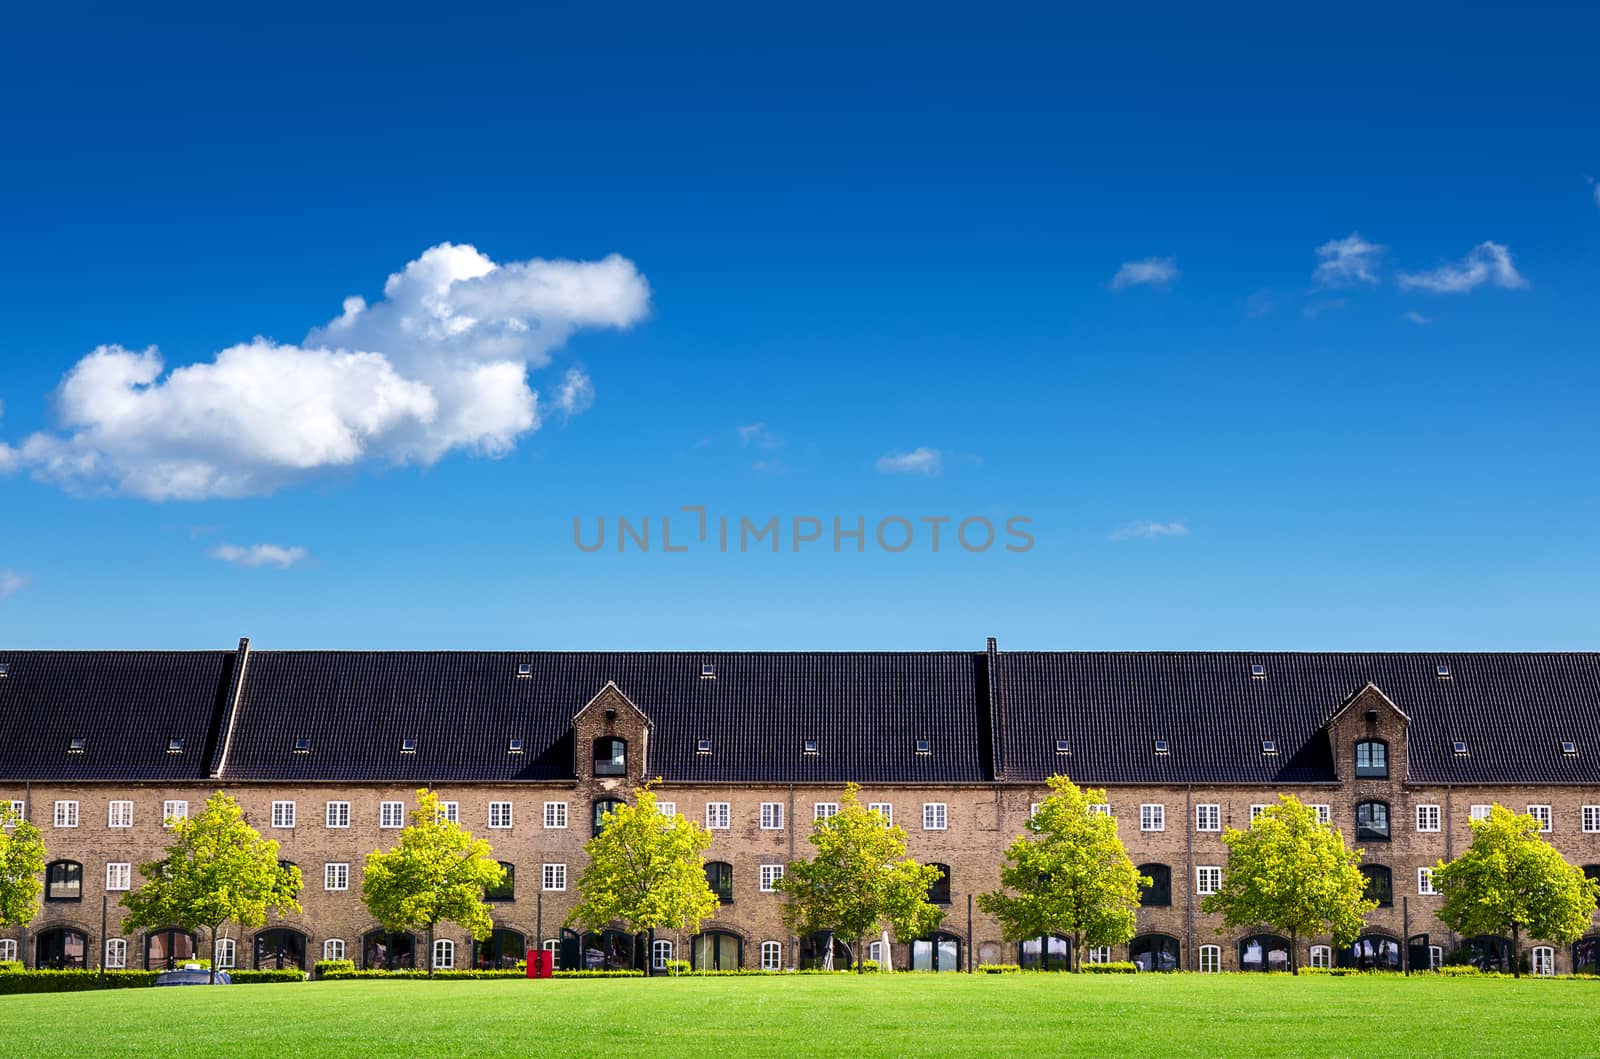 Classic apartment with clear blue sky and grass lawn in Copenhag by kunchainub